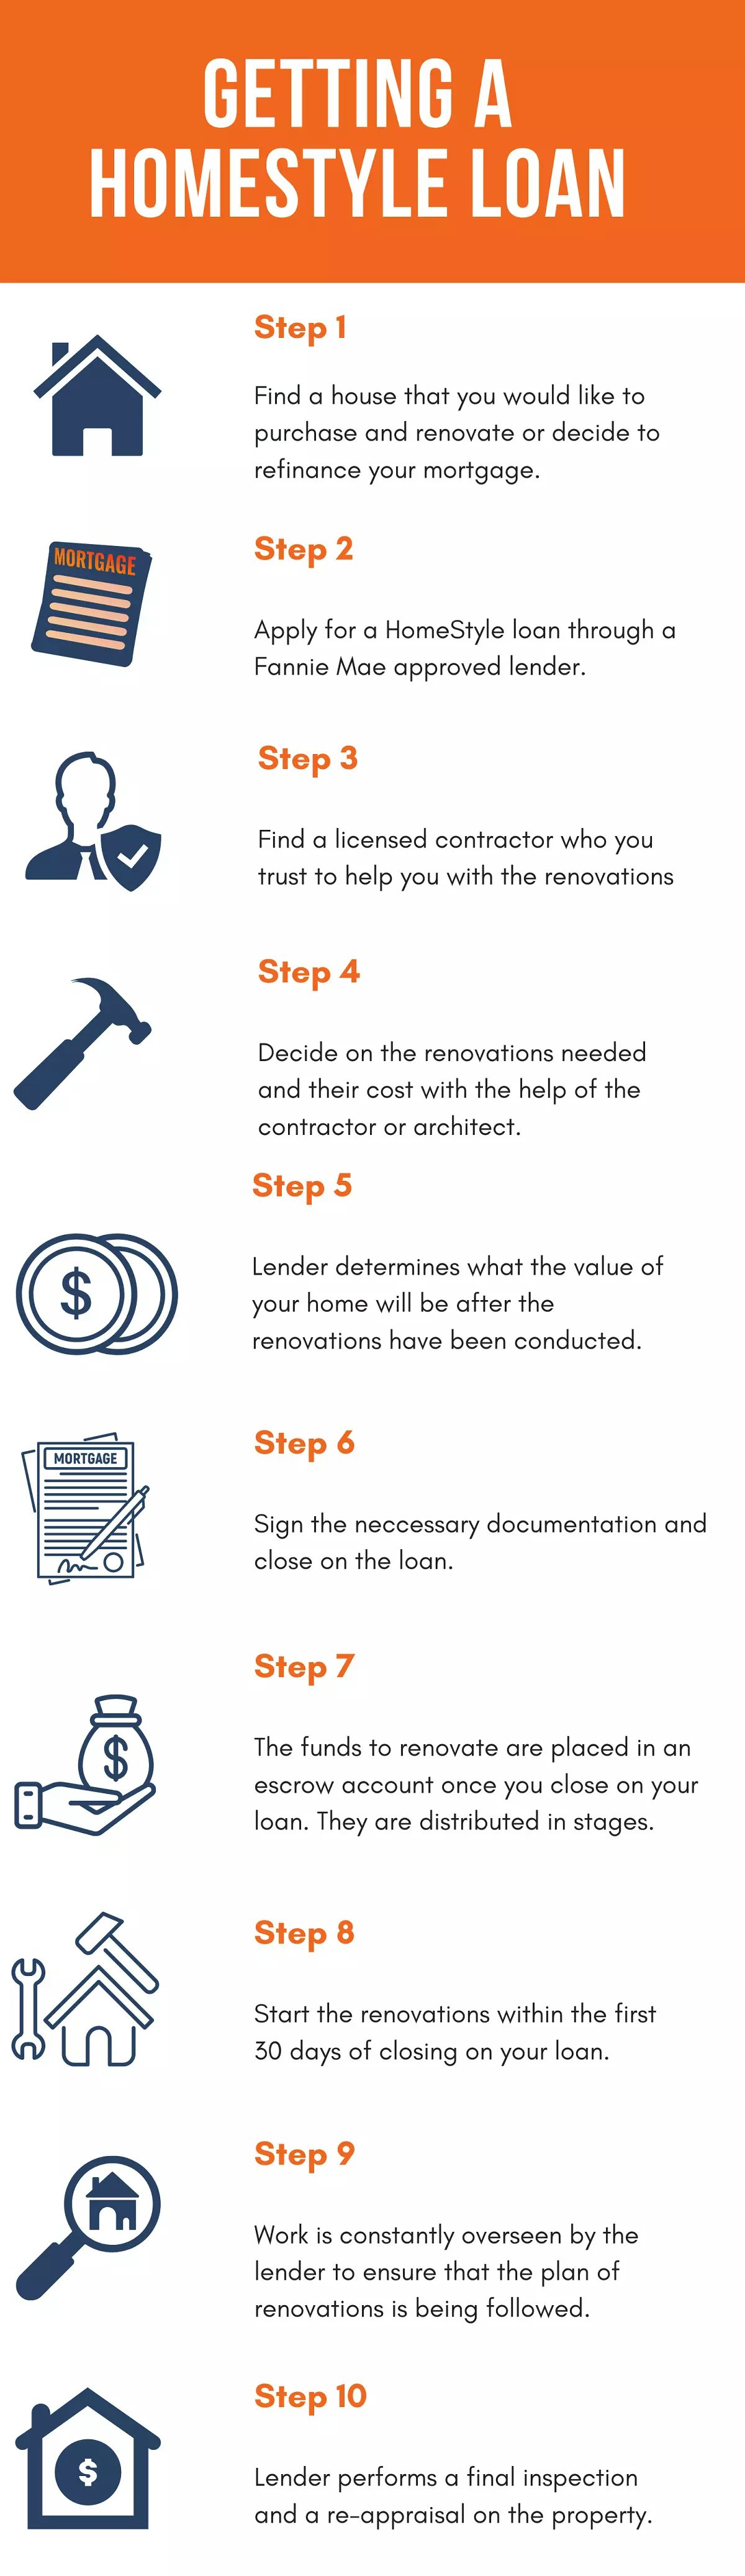 Getting a HomeStyle Loan Infographic